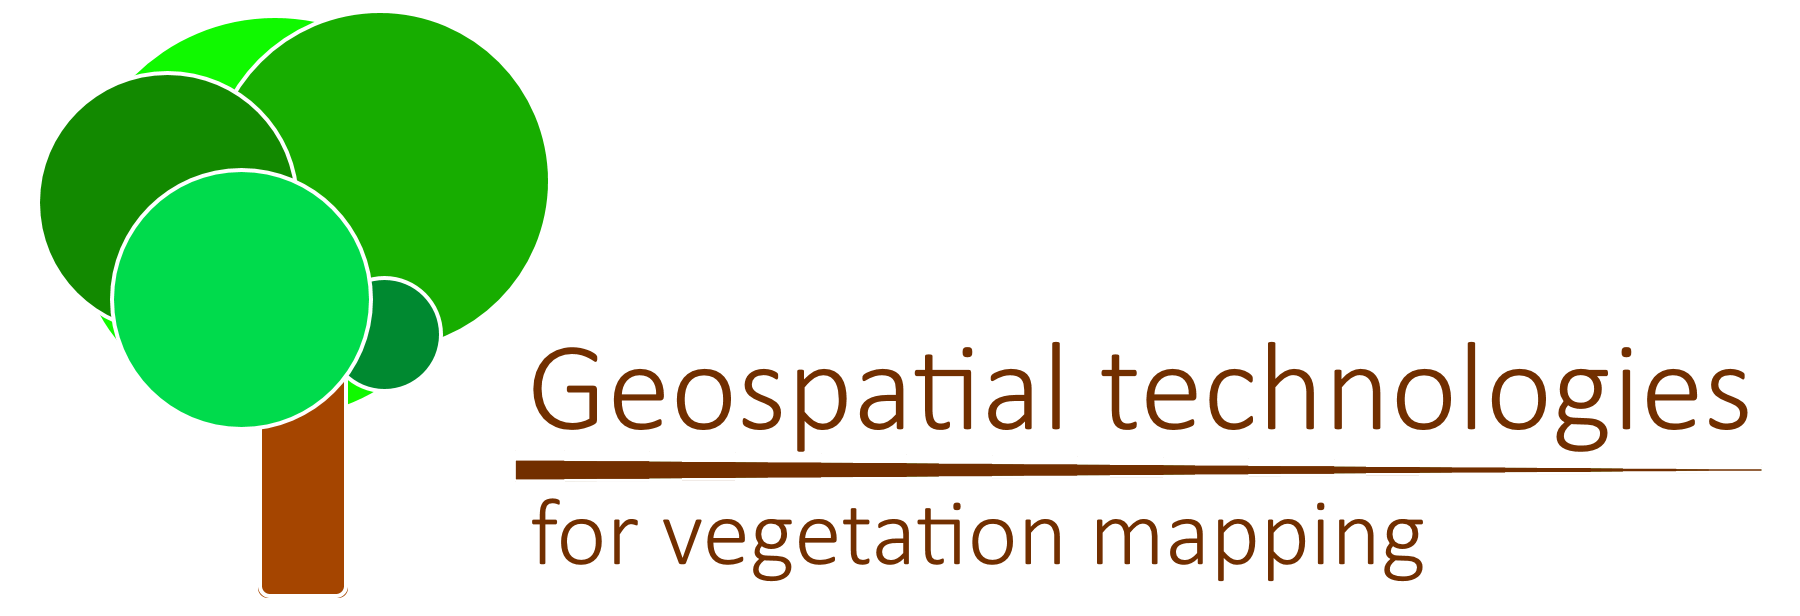 Geospatial Technologies for Vegetation Mapping